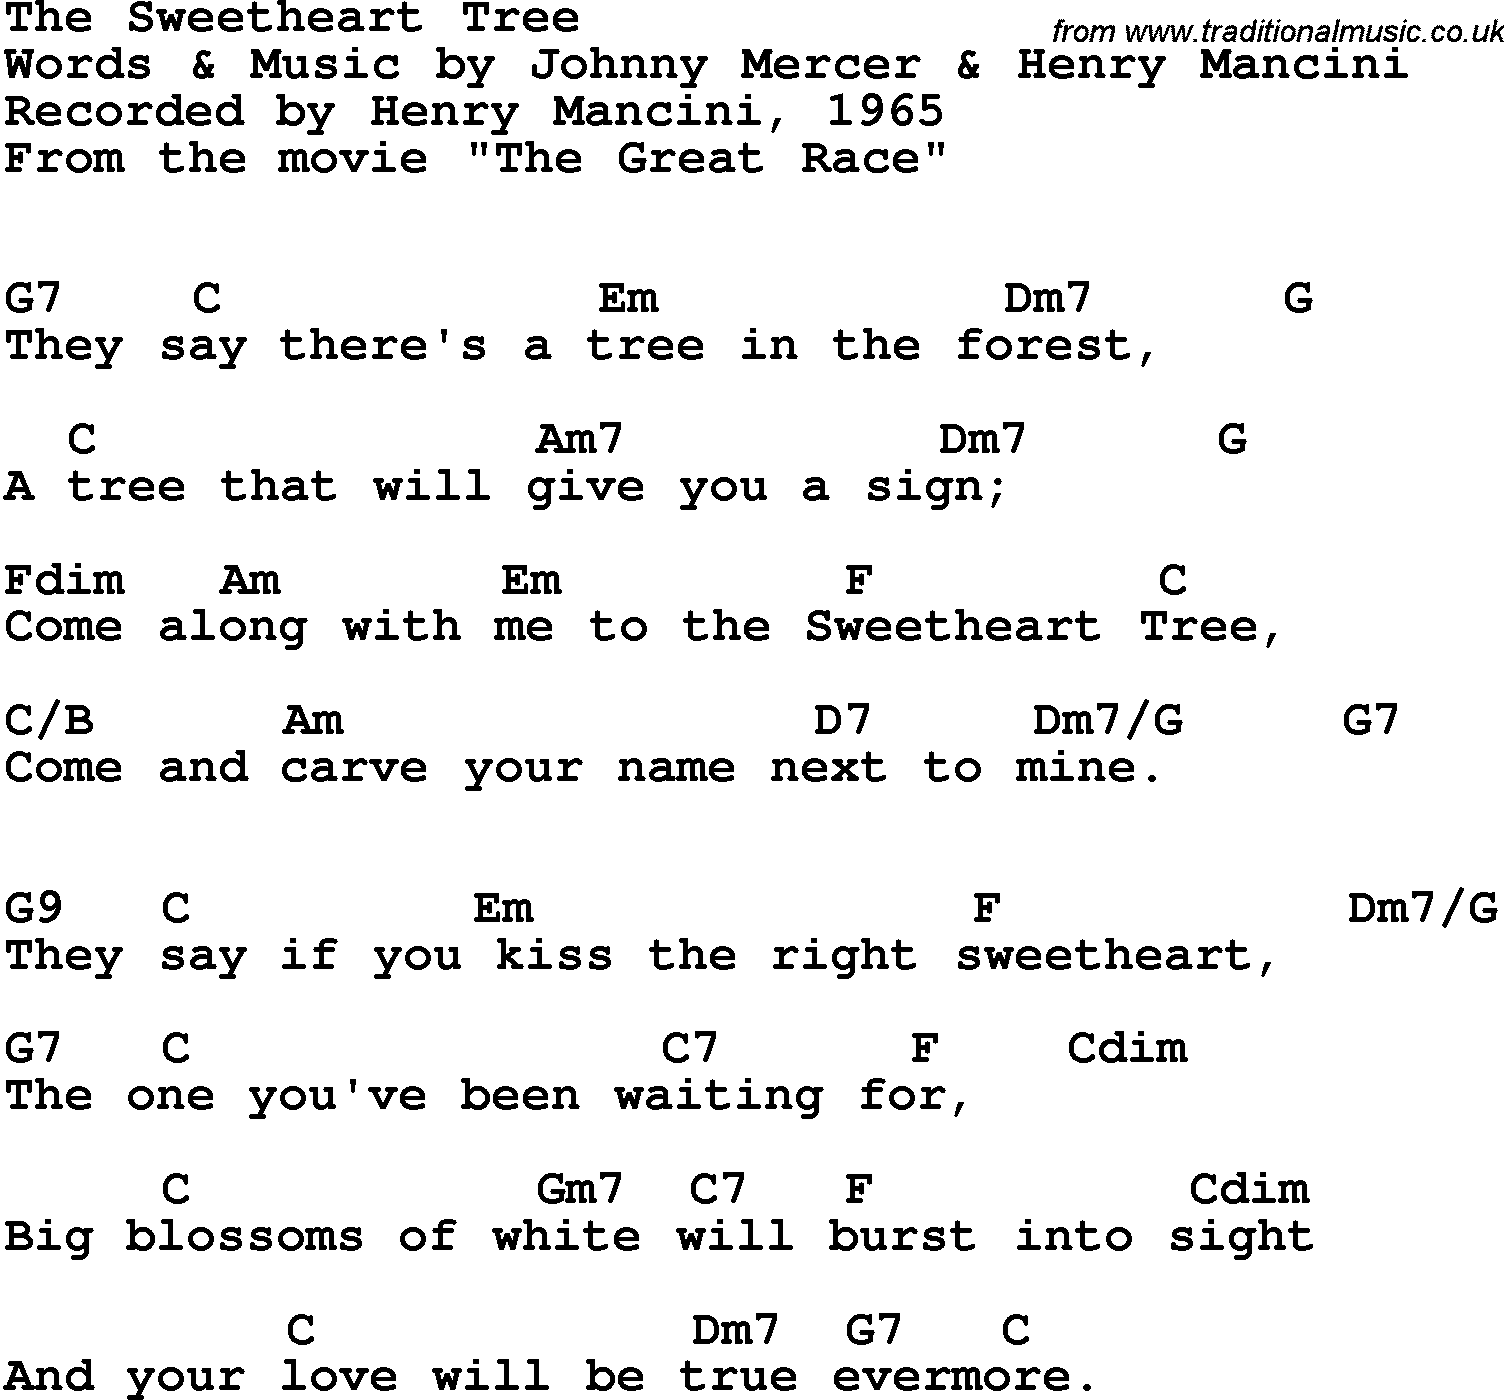 Song Lyrics With Guitar Chords For Sweetheart Tree The Henry Mancini 1965 